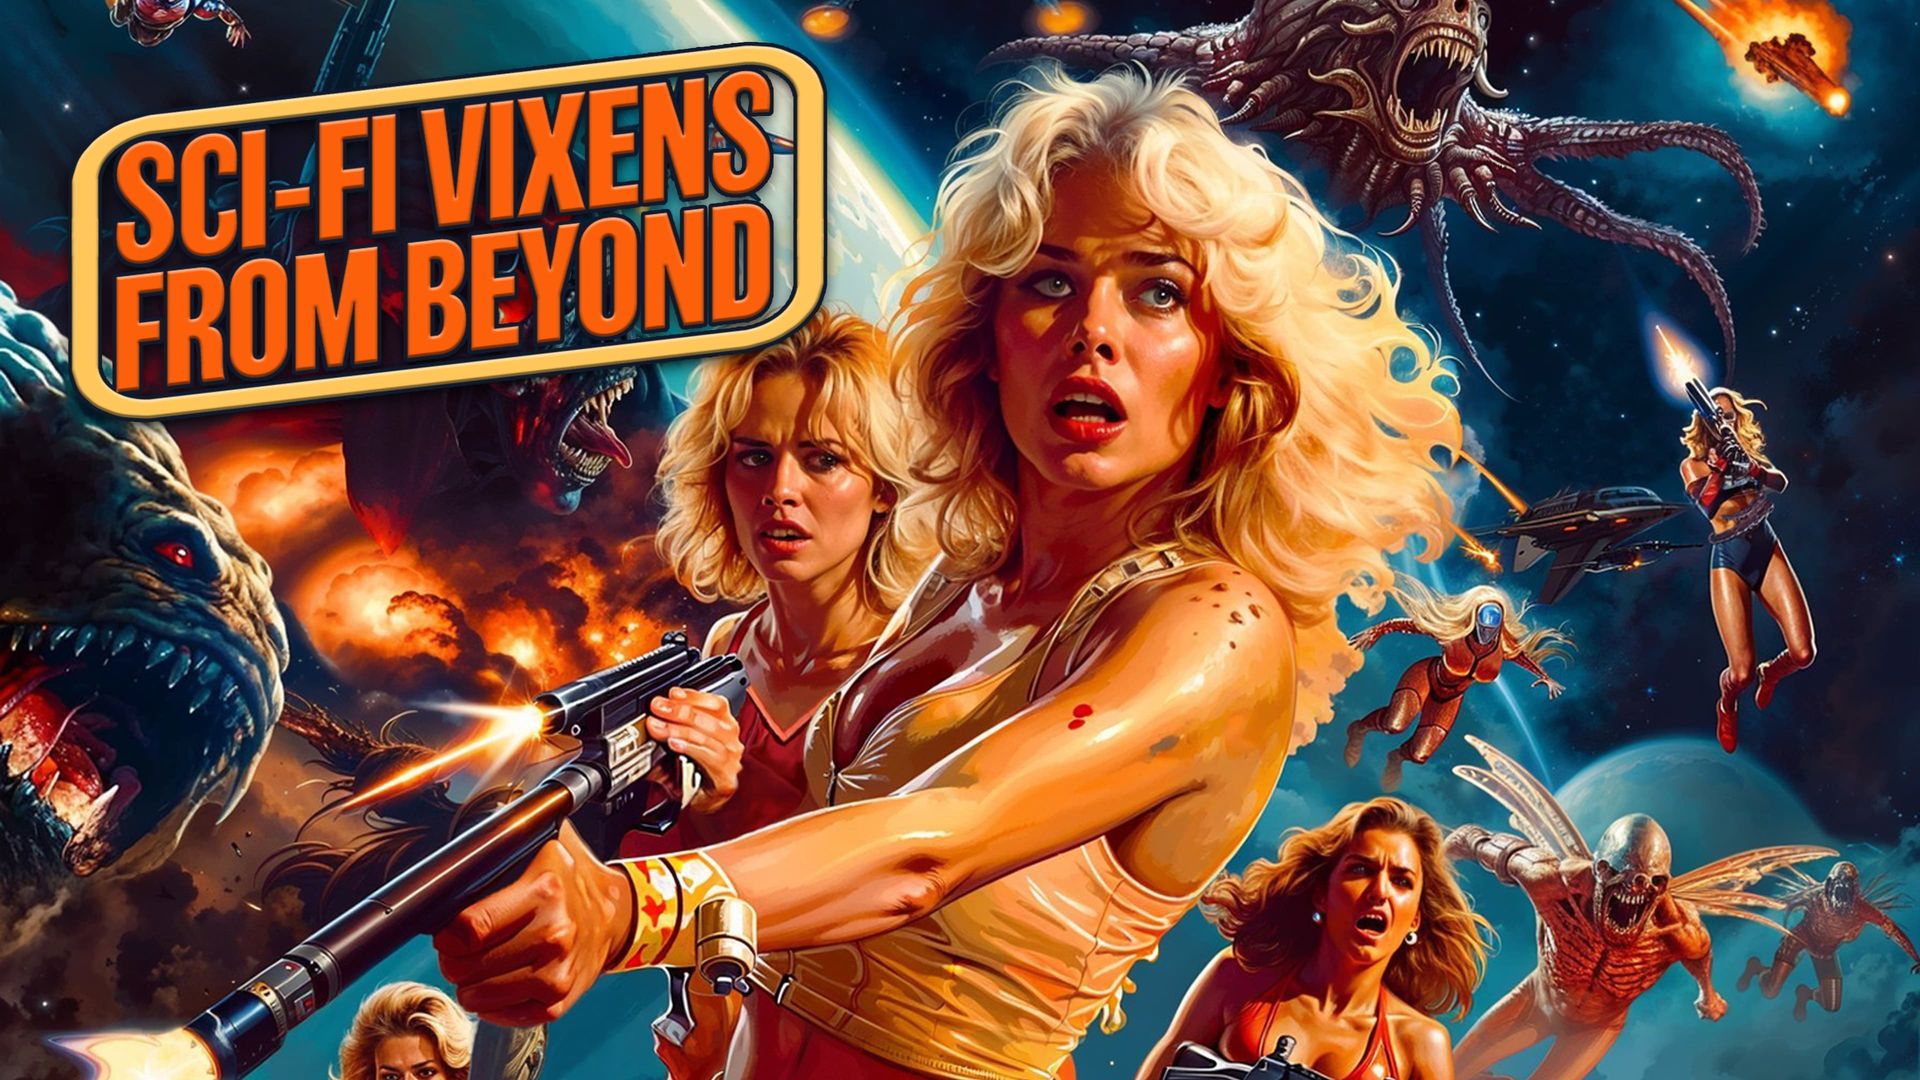 Sci-Fi Vixens from Beyond background